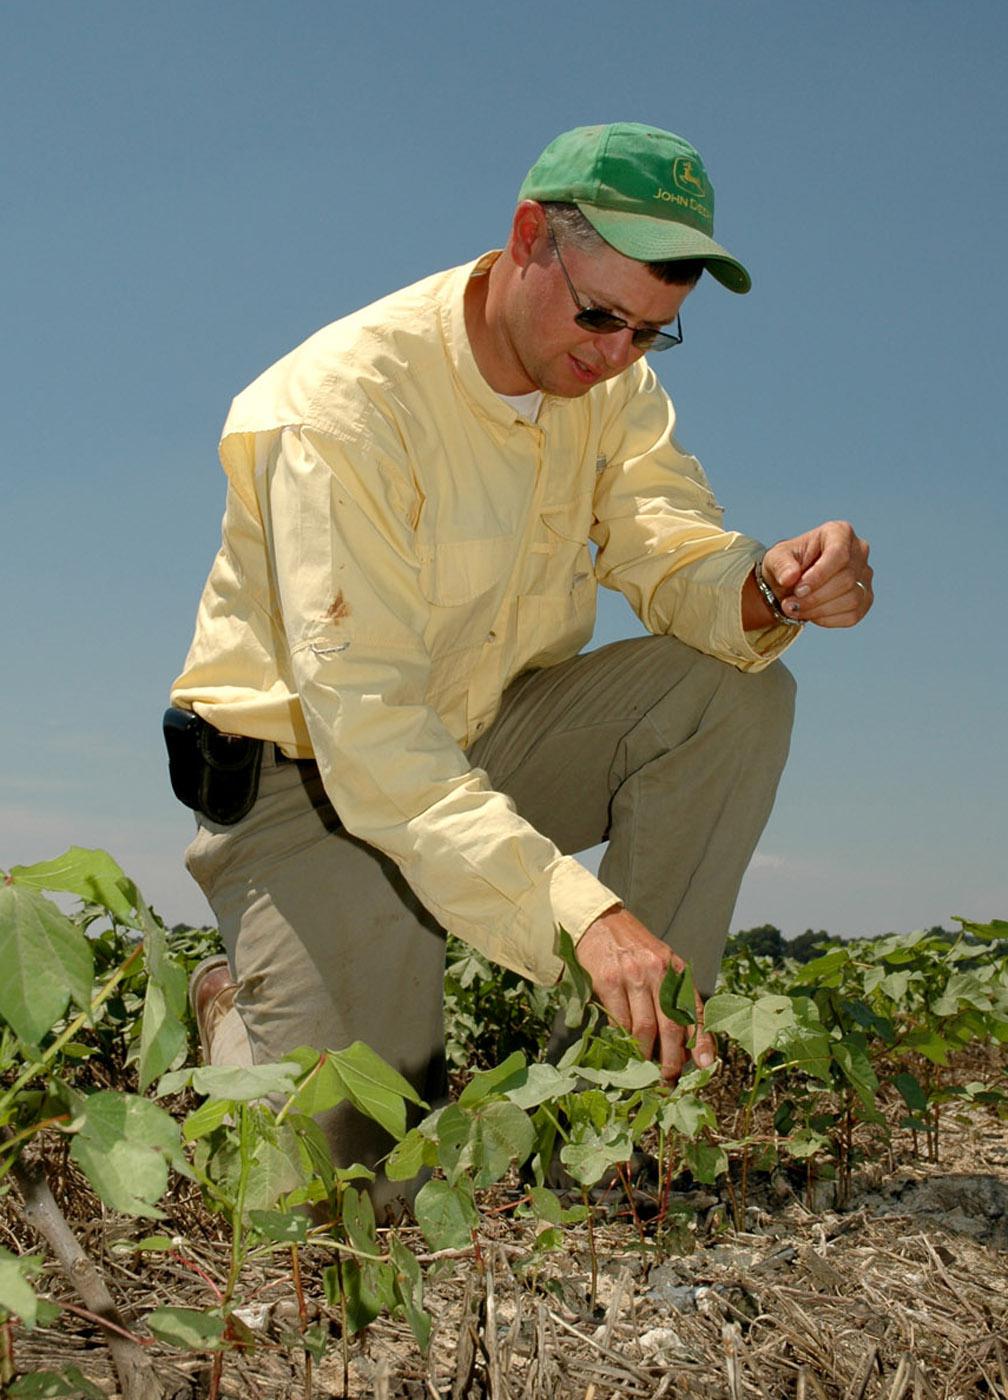 Coley Little Bailey of Yalobusha County checks to see how some of his cotton is coping with the hot, dry conditions in mid-June. Bailey planted wheat after last fall's cotton harvest to assist the 2006 cotton crop. Bailey applies a herbicide a couple of weeks before spring planting to kill the wheat. The cover crop then provides wind protection for young cotton, and its massive root system helps the soil retain moisture longer during droughts.